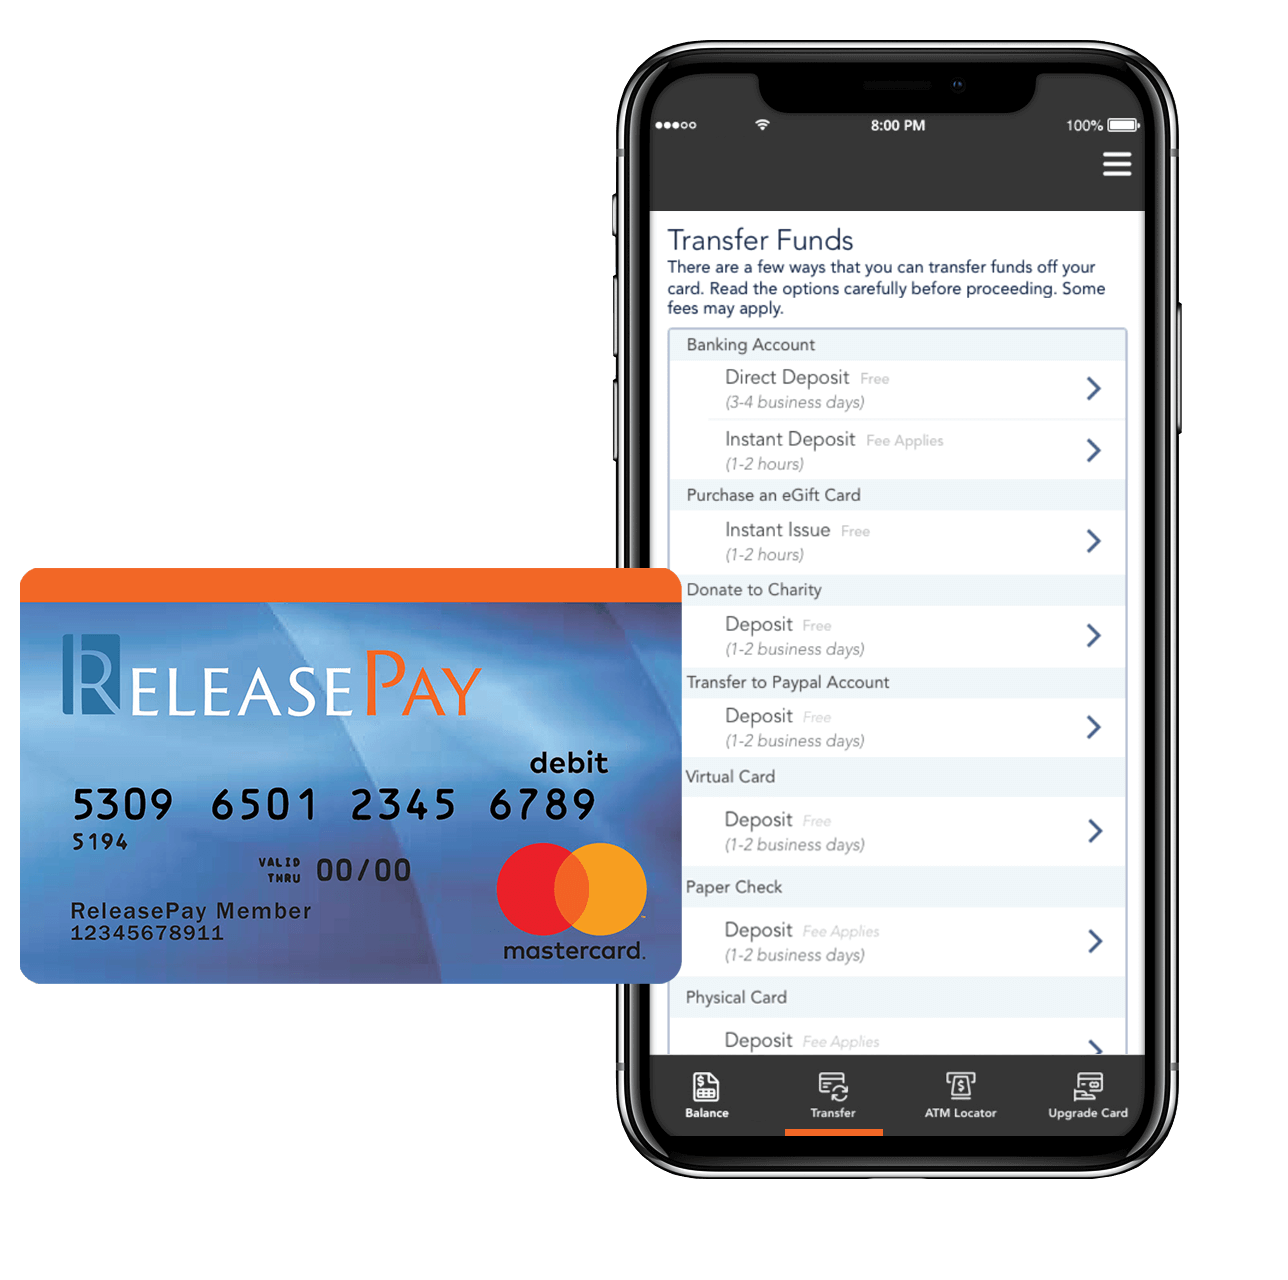 ReleasePay card and mobile app